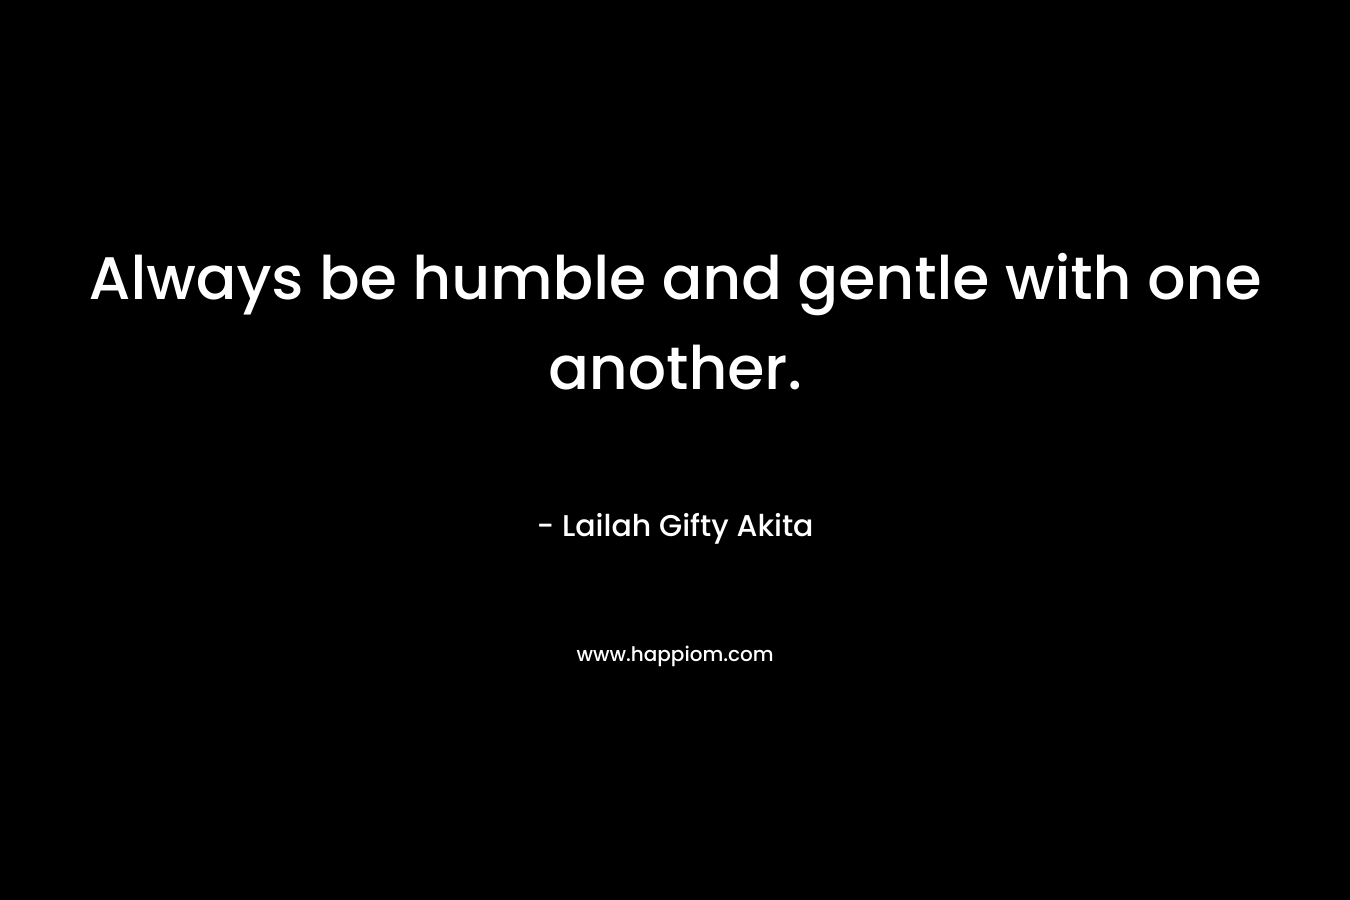 Always be humble and gentle with one another.